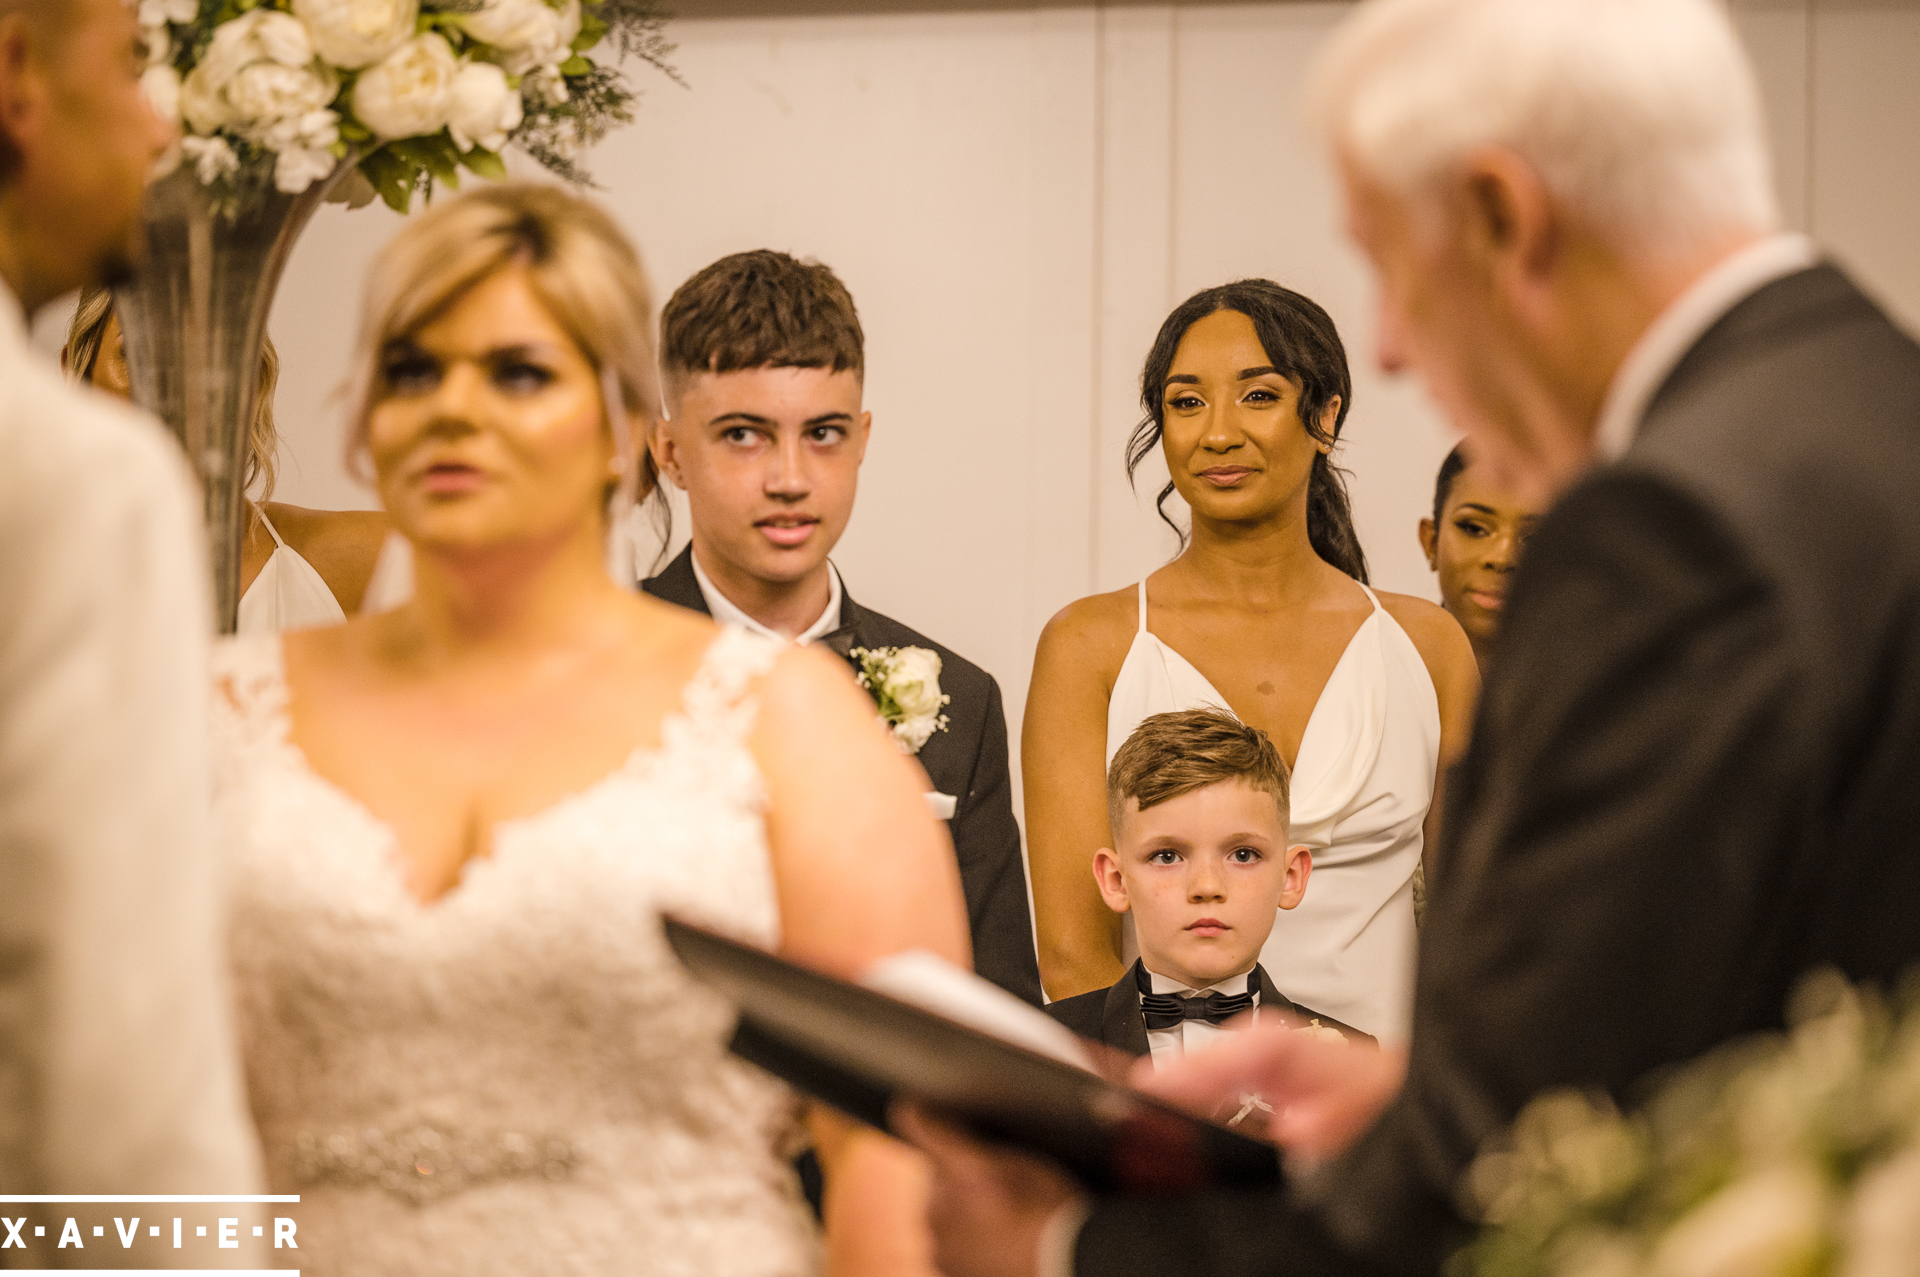 pageboys look on at the ceremony